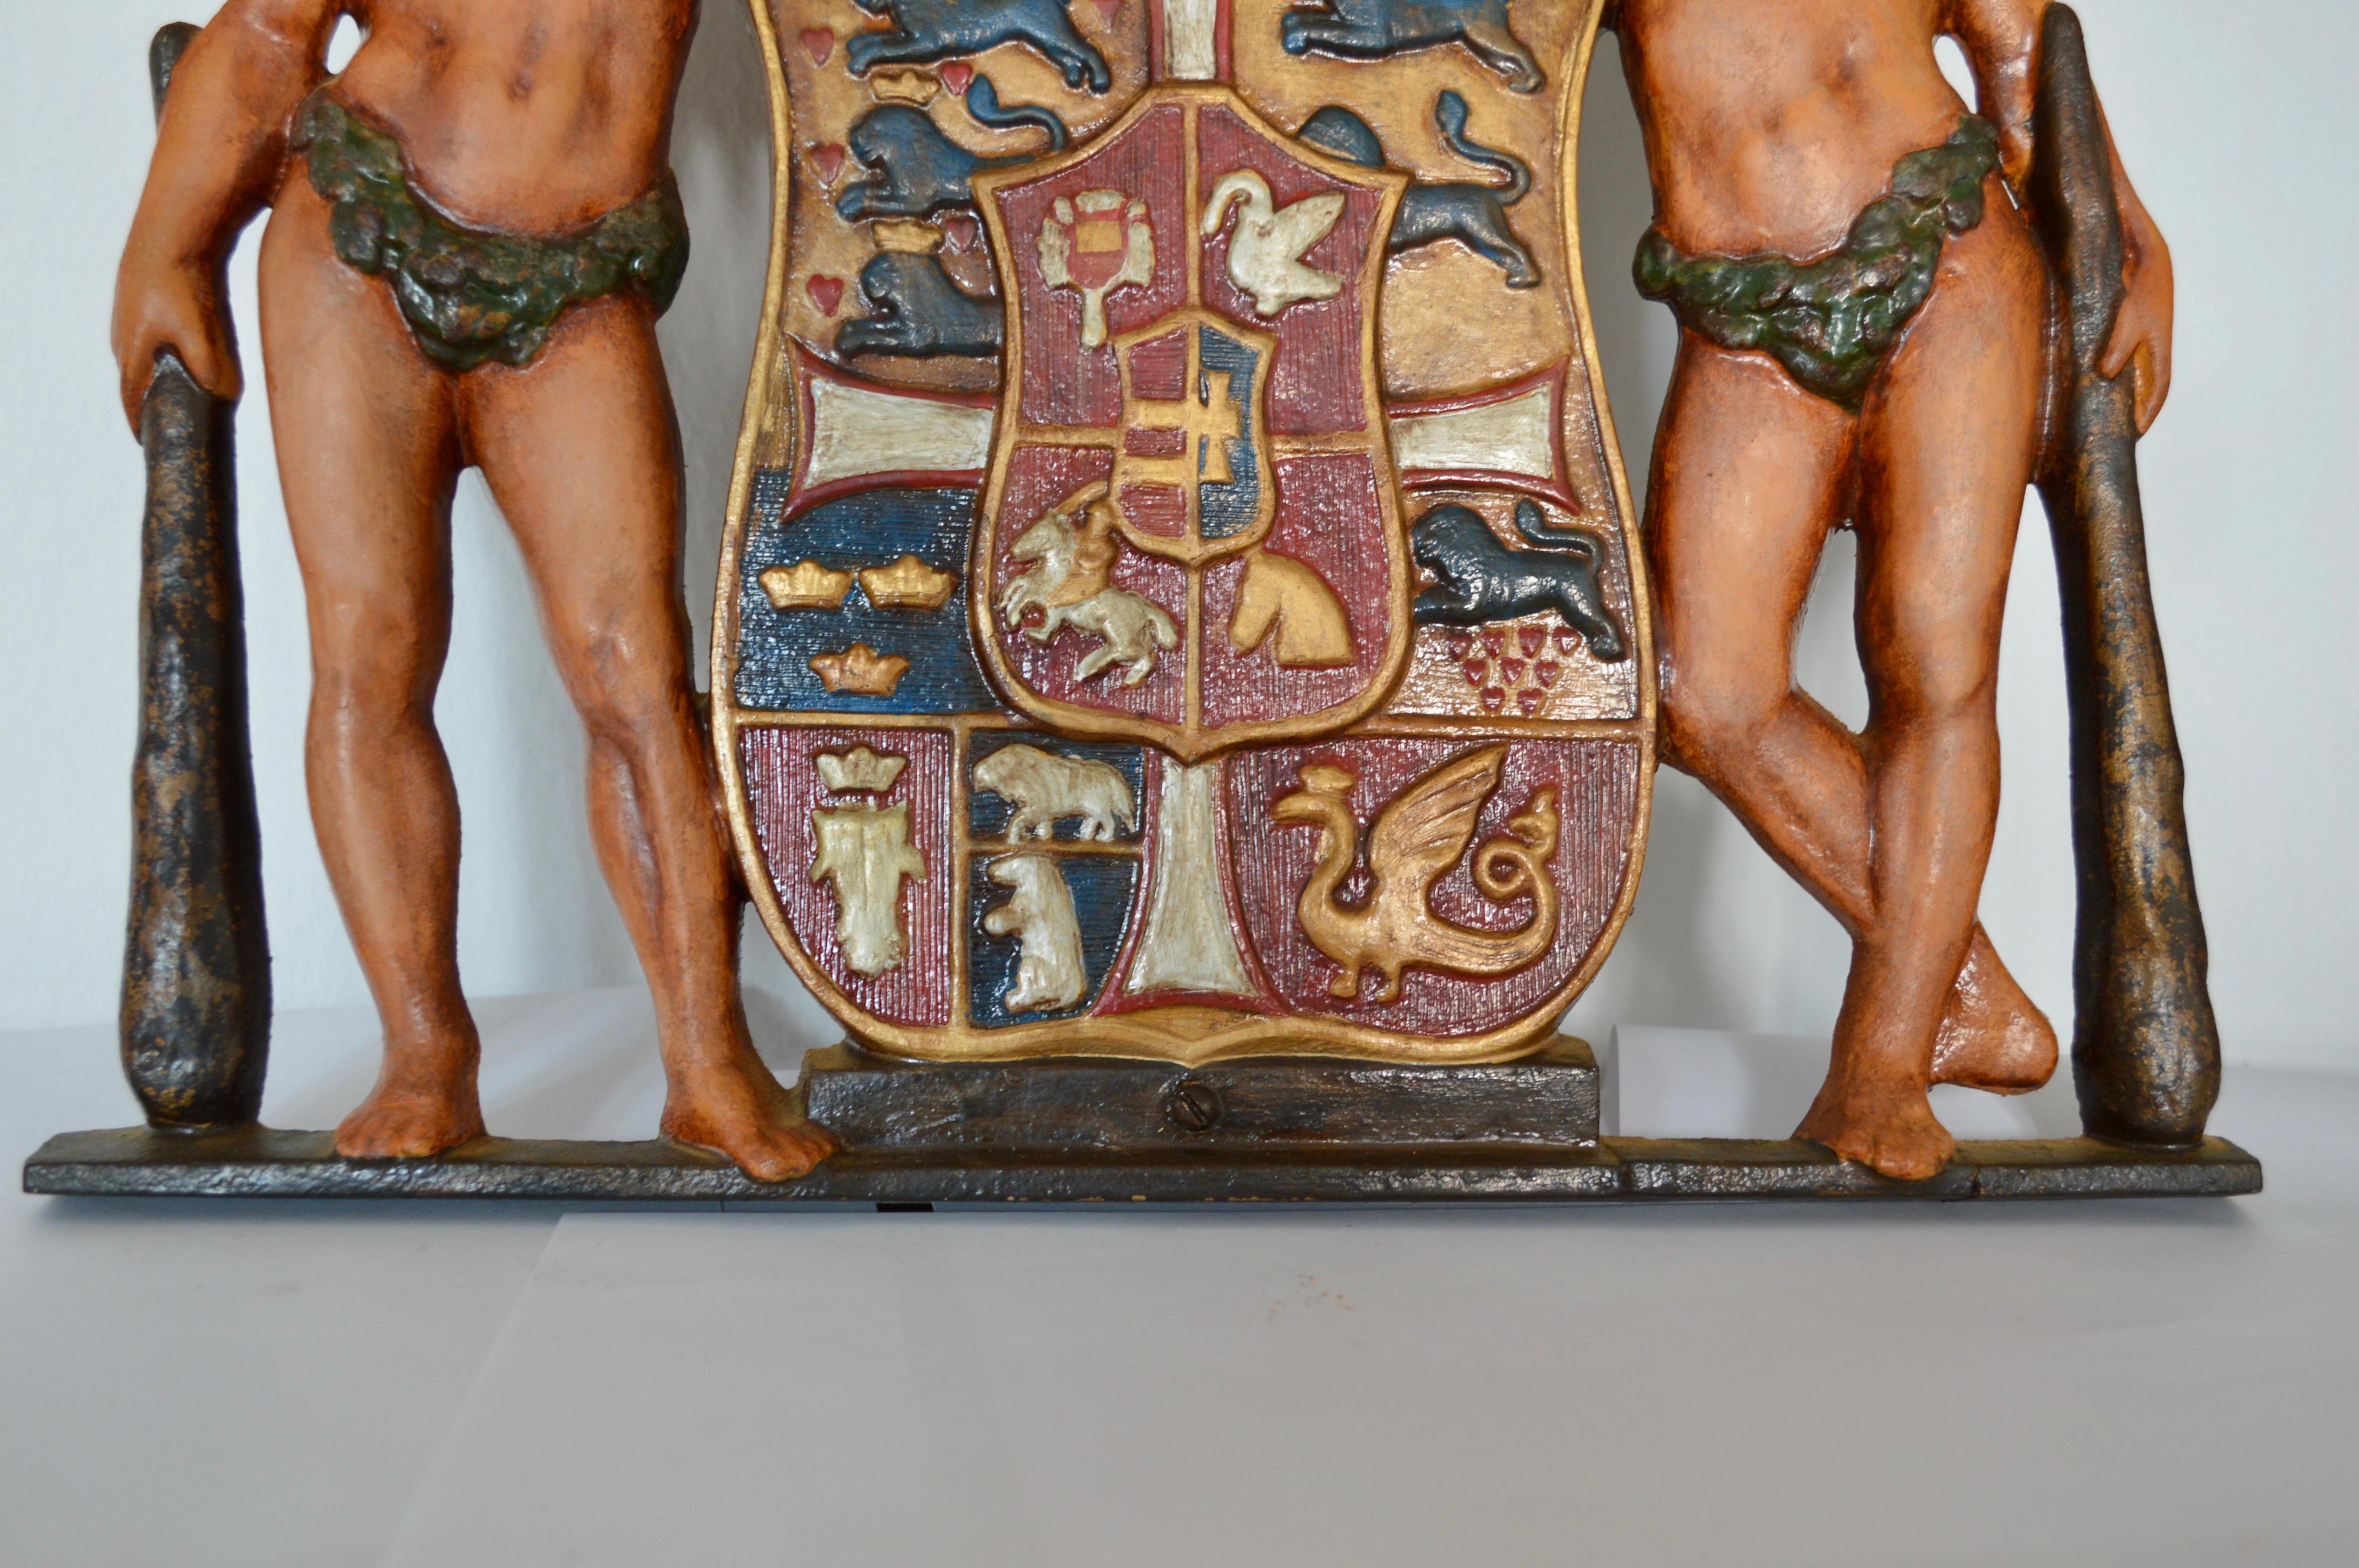 Late 19th Century Cast Iron Sculpture Of The Royal Coat of Arms of Denmark